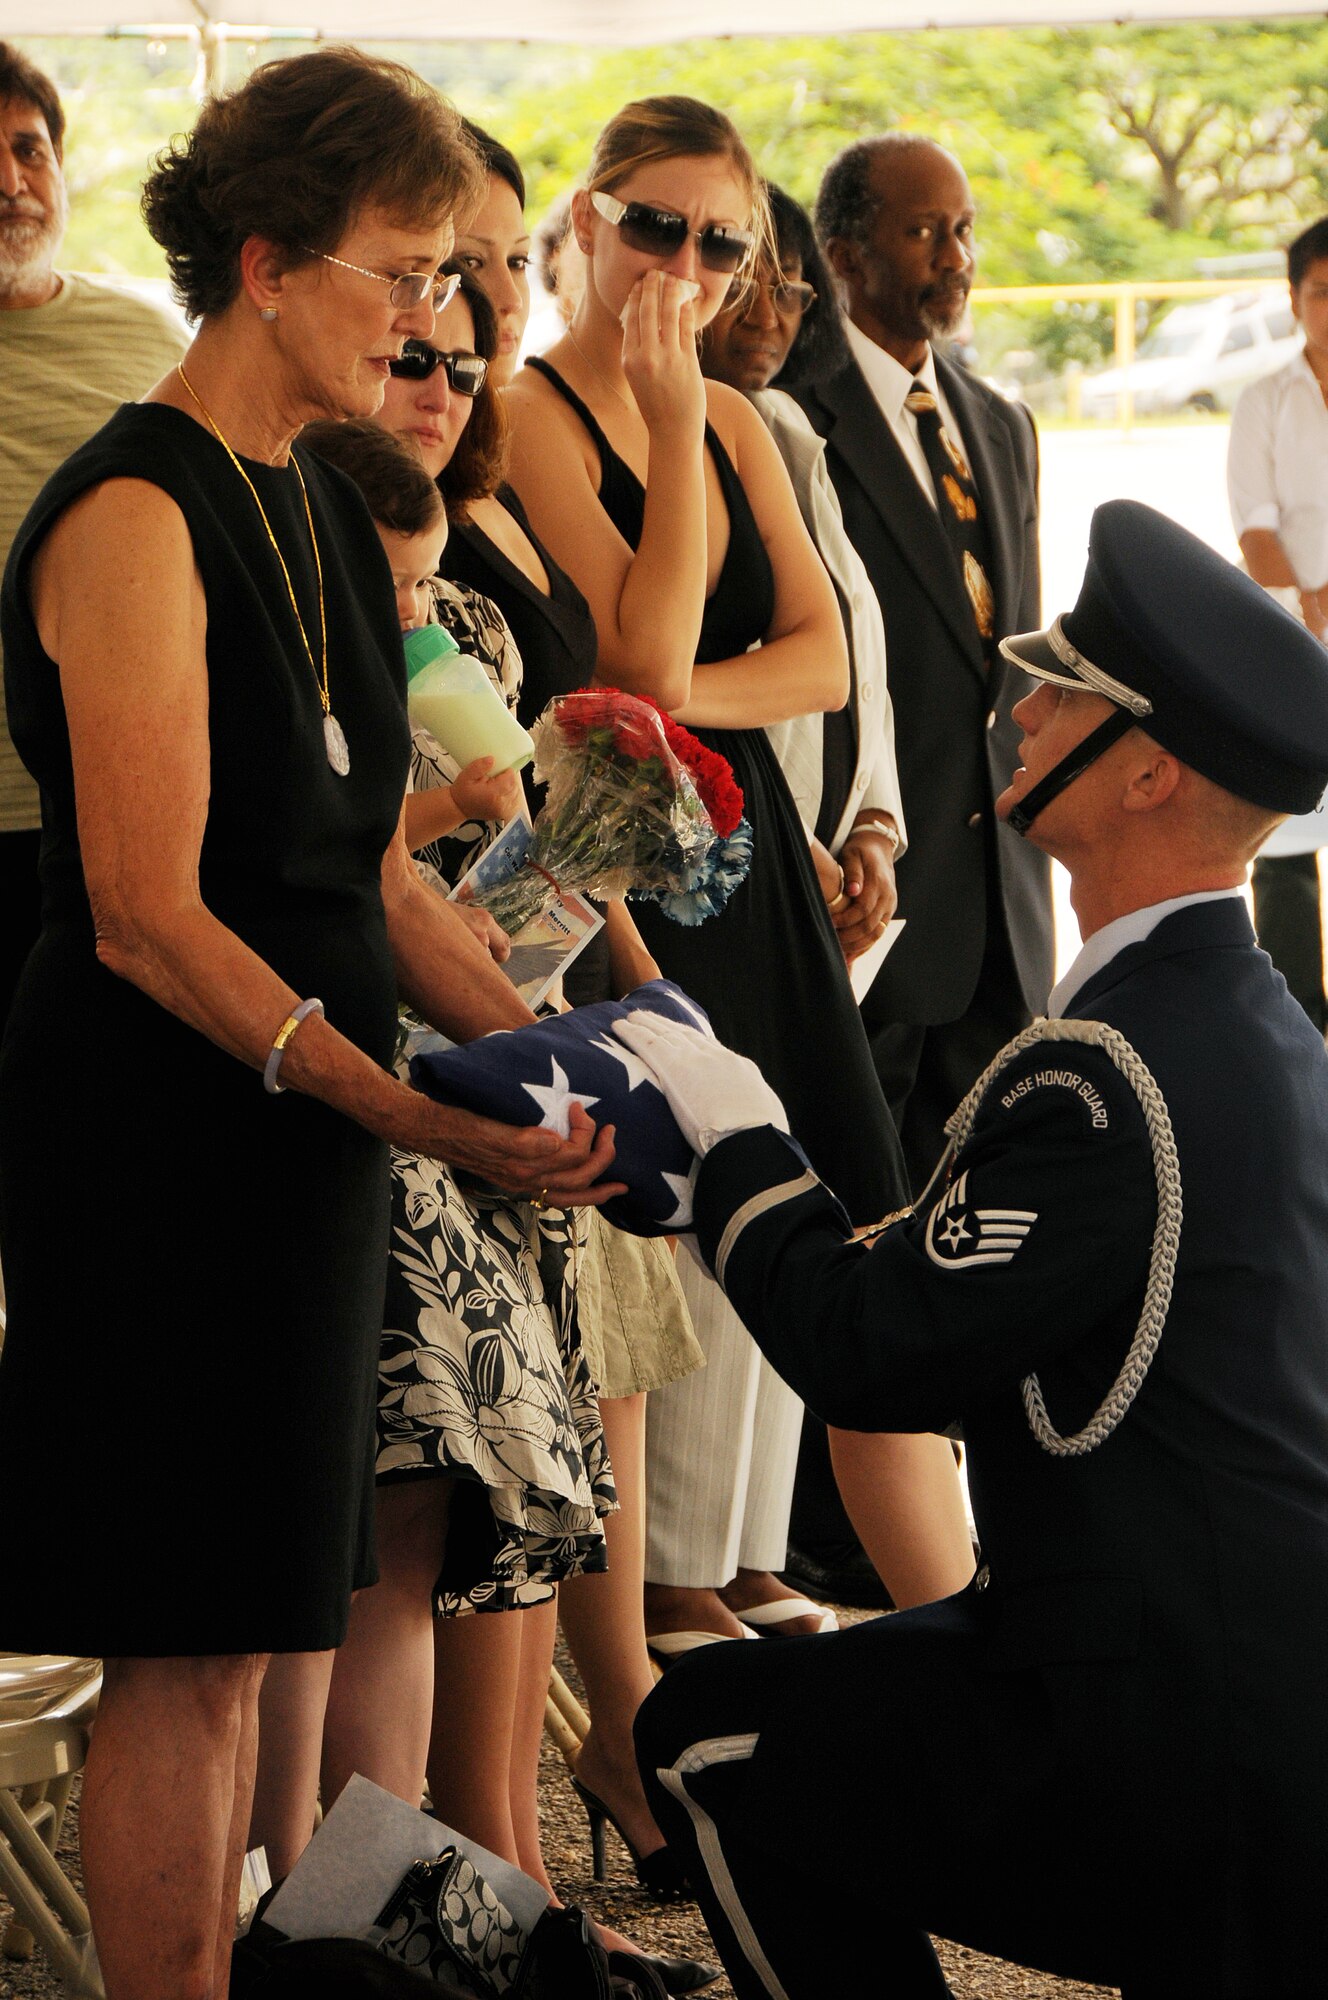 ANDERSEN AIR FORCE BASE, Guam - United States Air Force Honor Guard member Staff Sgt. Noah Bolton presents the American flag to Ann Merritt while the 21-gun salute is rendered during Col. Walter "Tony" Merritt's memorial service at the John F. Kennedy High School in Tammuning, Guam, Oct. 4. Colonel Merritt retired from active duty in 1979 but never left the service. He gave back to the community by serving 28 years as a Junior Reserve Officer's Training Corps instructor at JFK High School and Air Force Liaison Officer to the Air Force Academy. (U.S. Air Force photo by Airman 1st Class Courtney Witt)